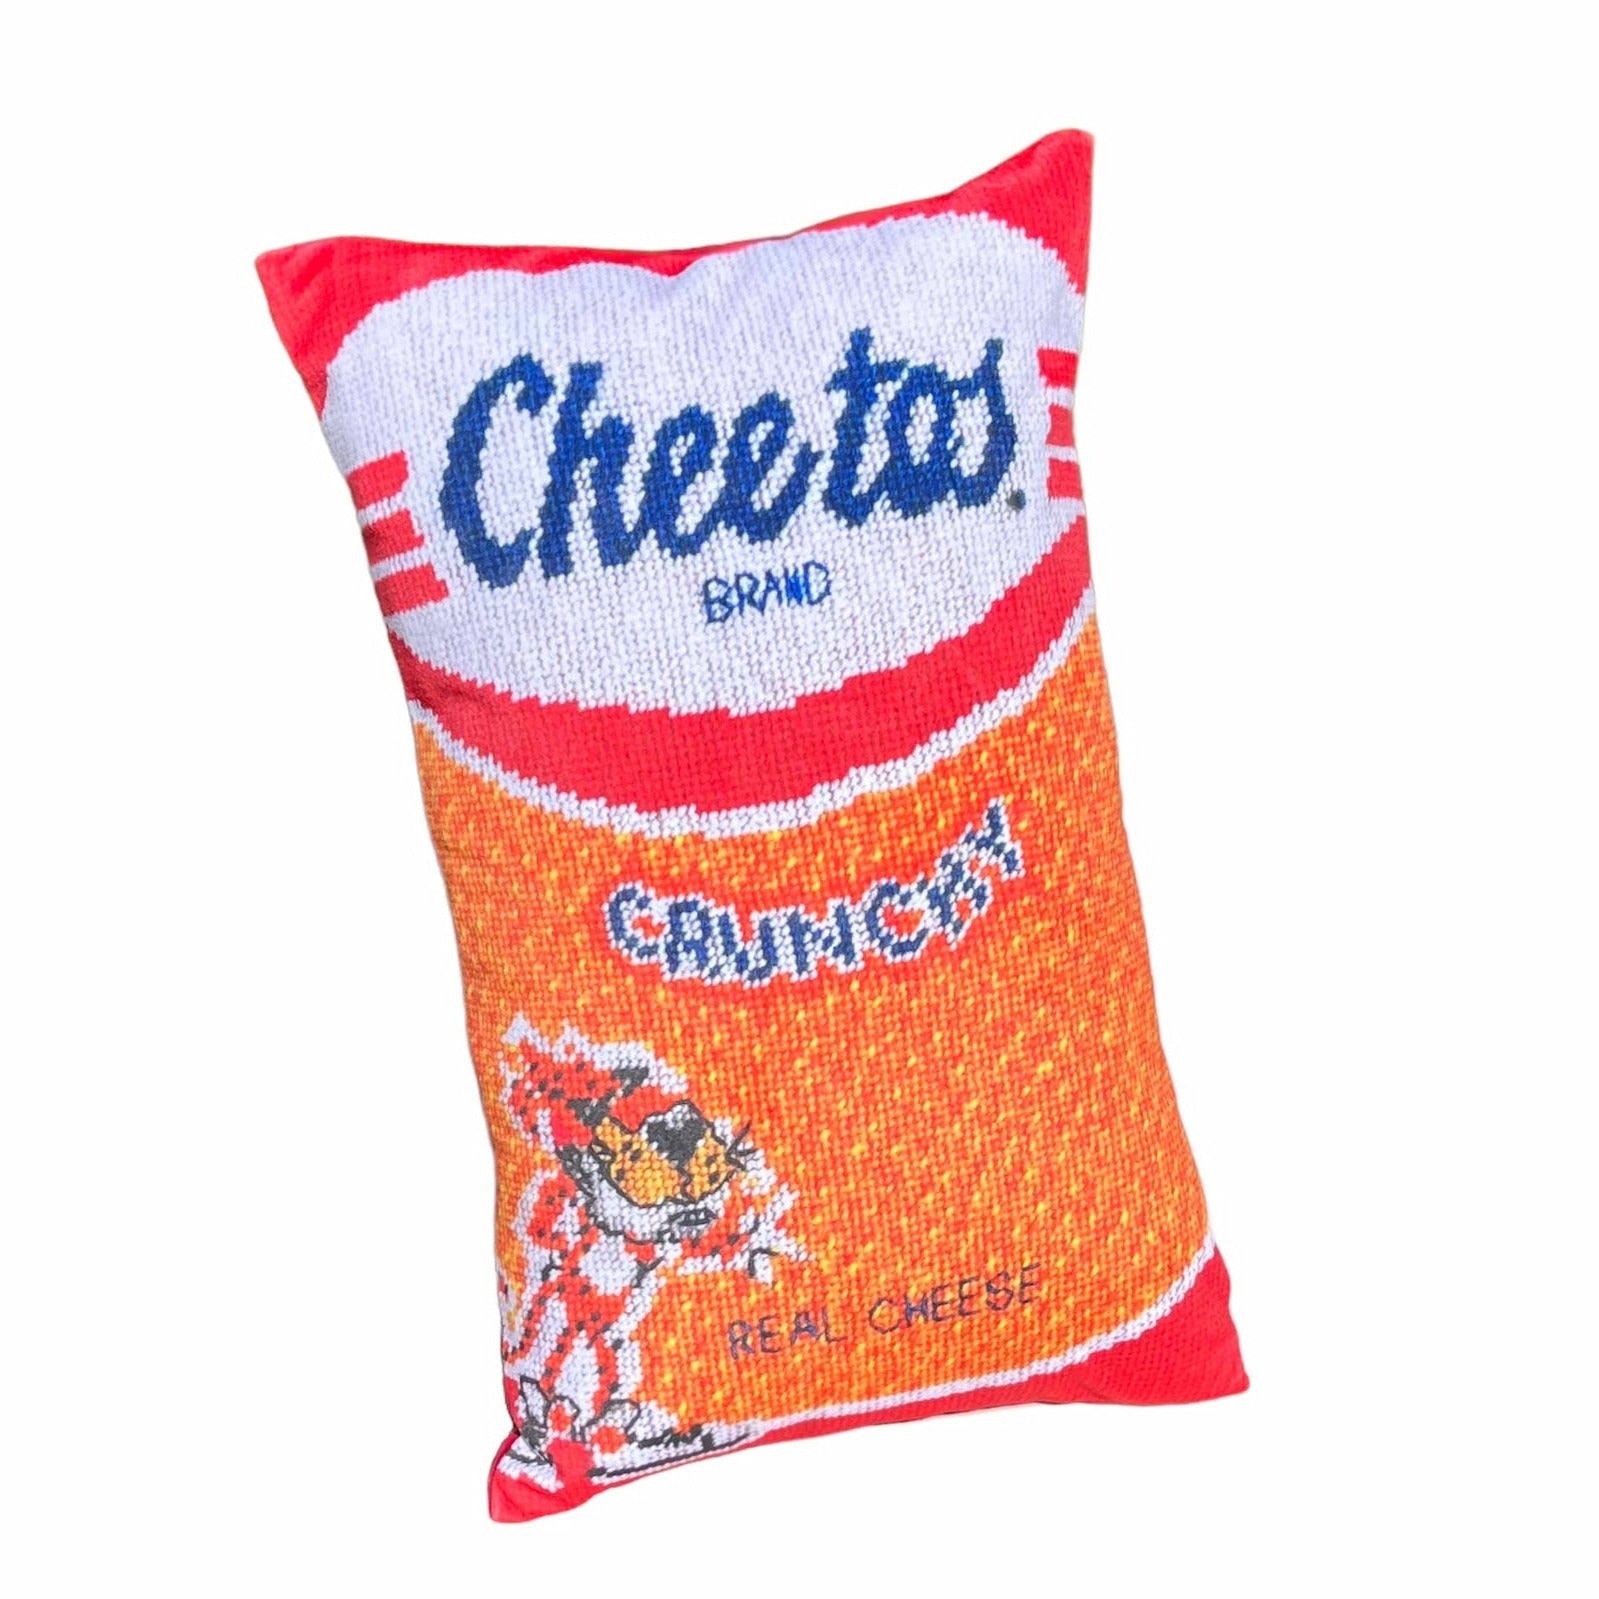 velvet pillow that looks just like a bag of Cheetos